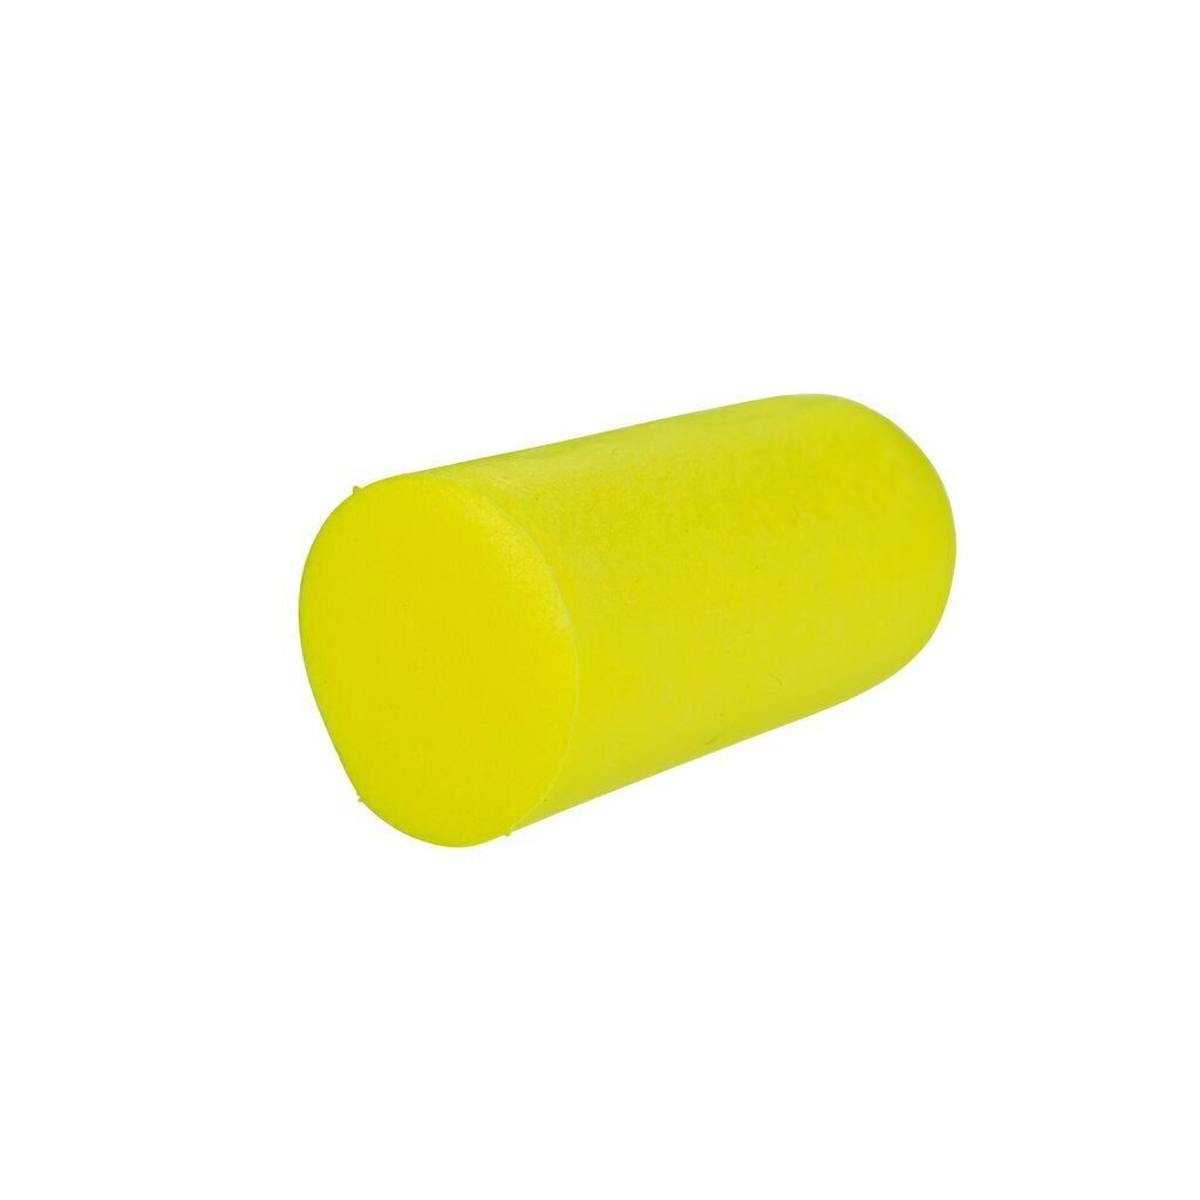 3M E-A-R Soft Yellow Neons, polyurethane, flexible and comfortable, in pairs in polybag, neon yellow, SNR=36 dB, ES01001